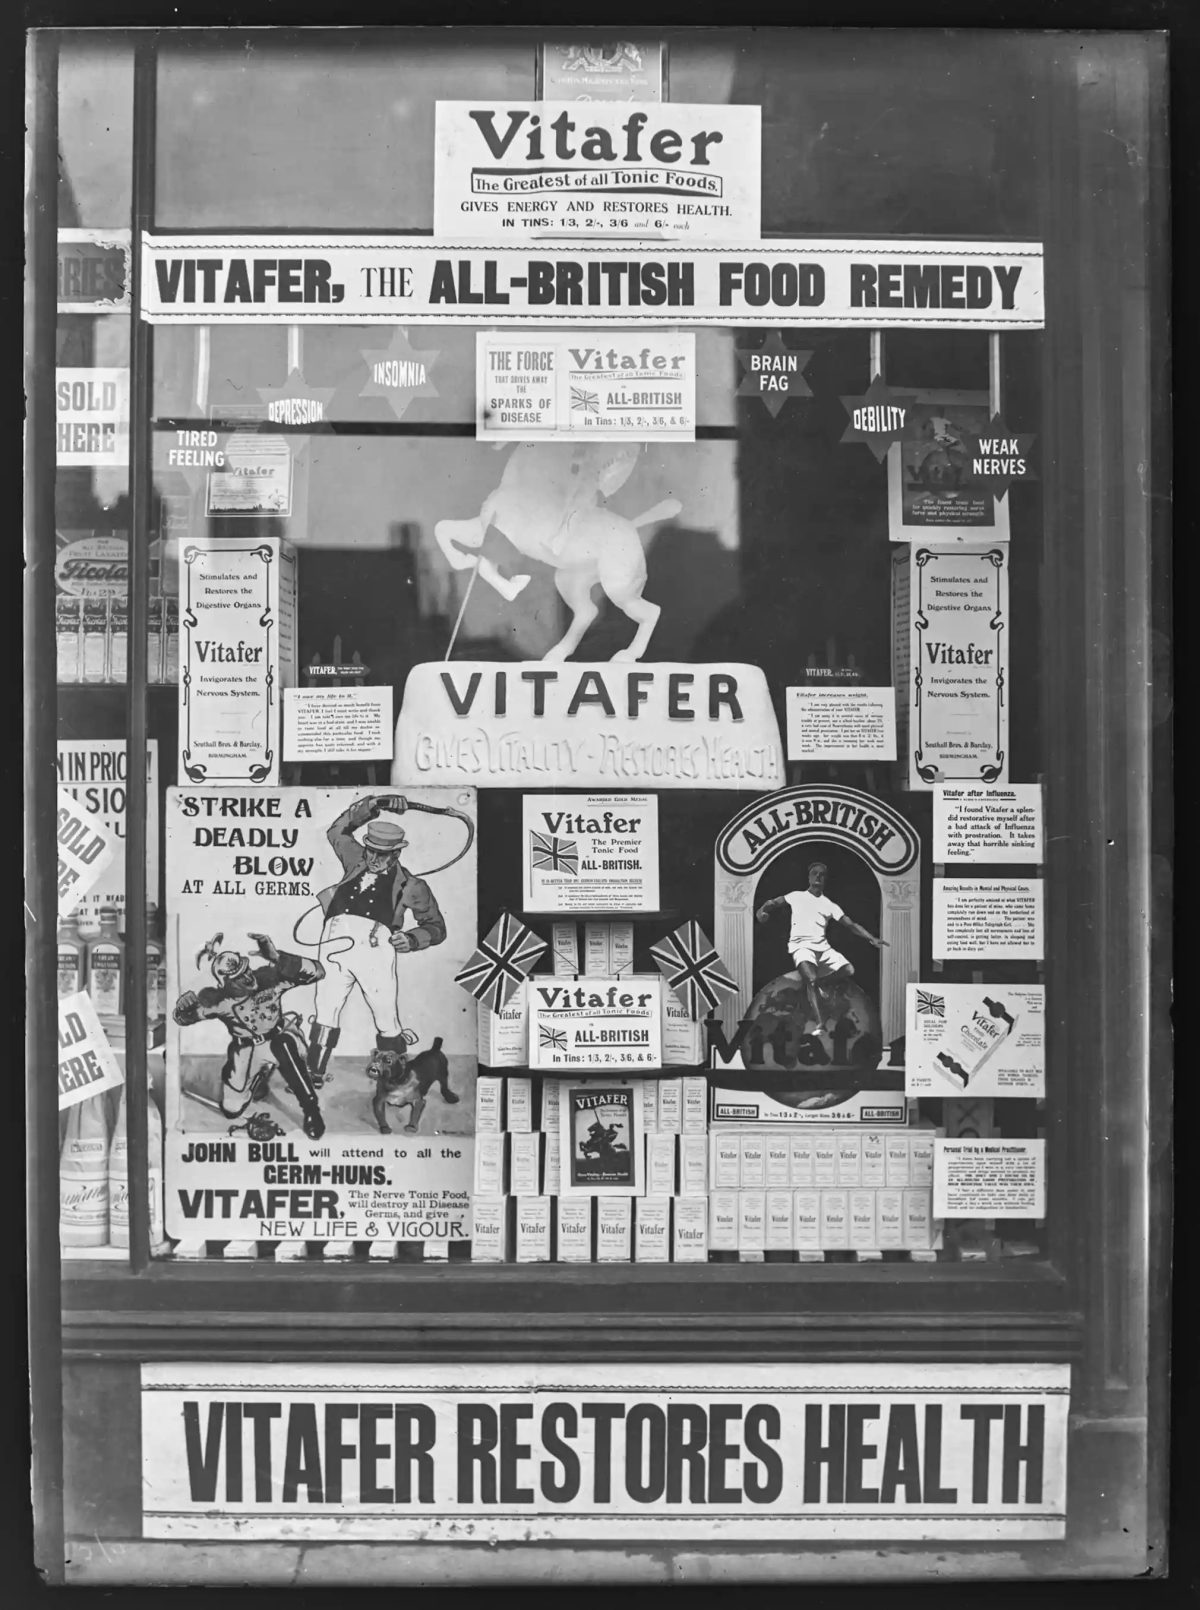 A shop window display for a restorative called Vitafer